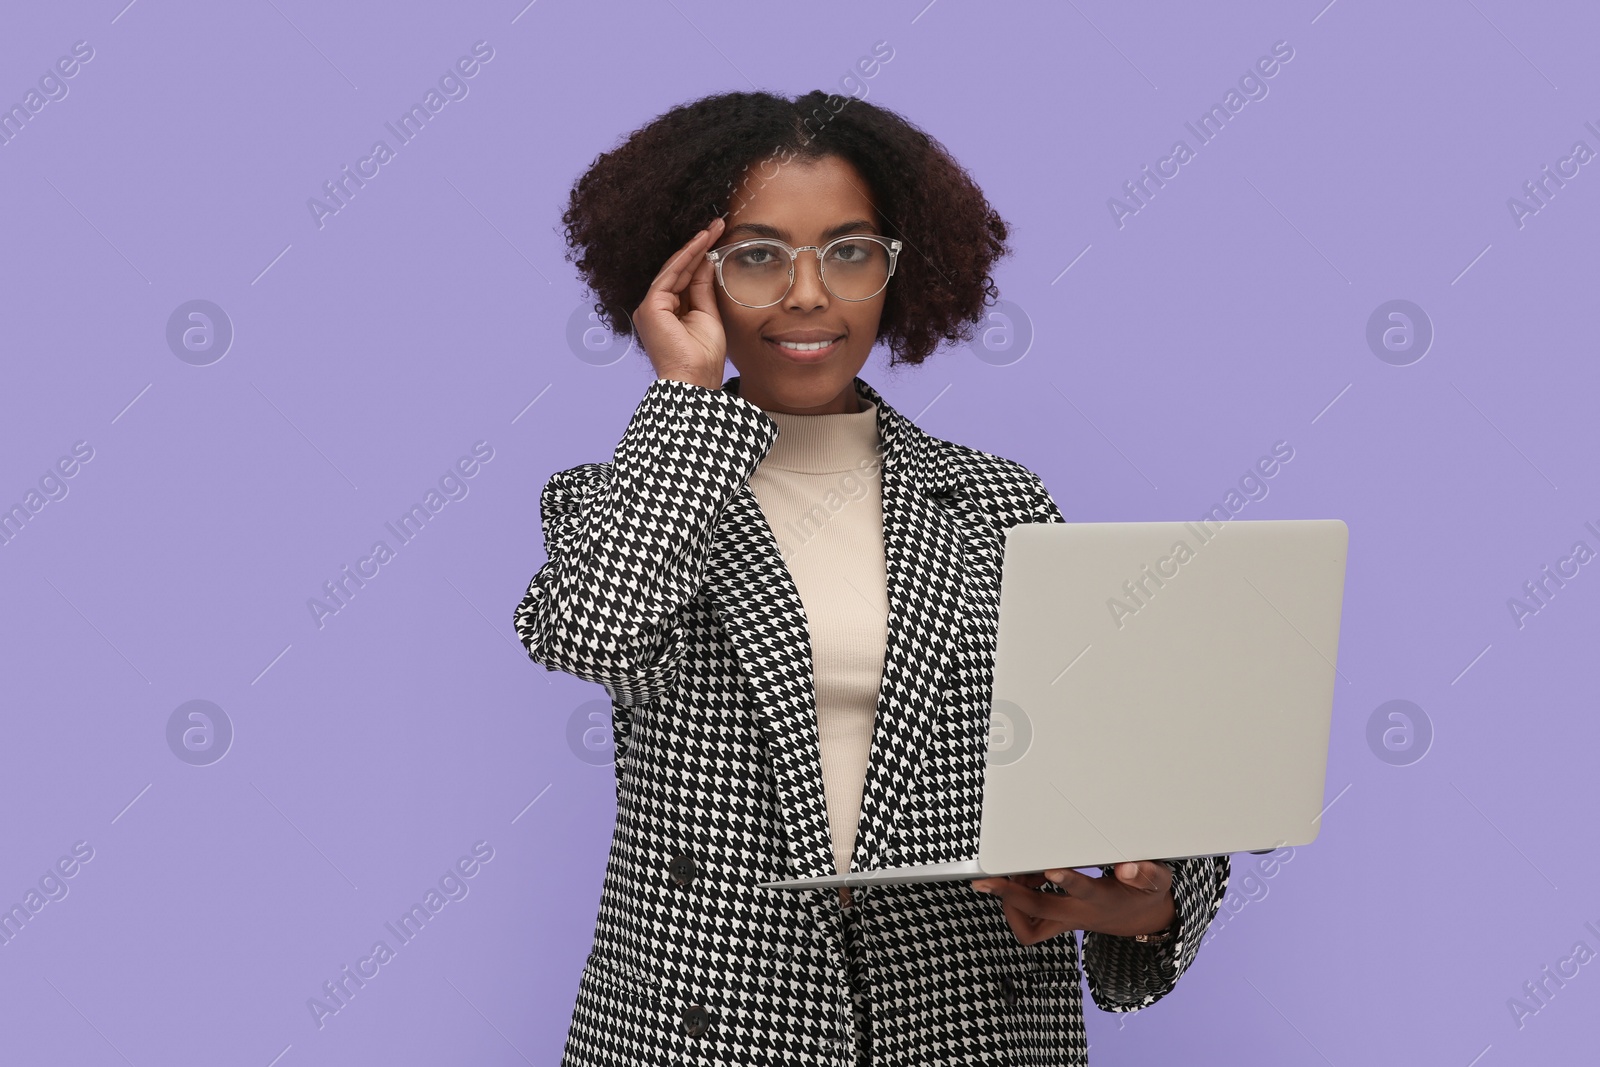 Photo of African American intern working on laptop against purple background